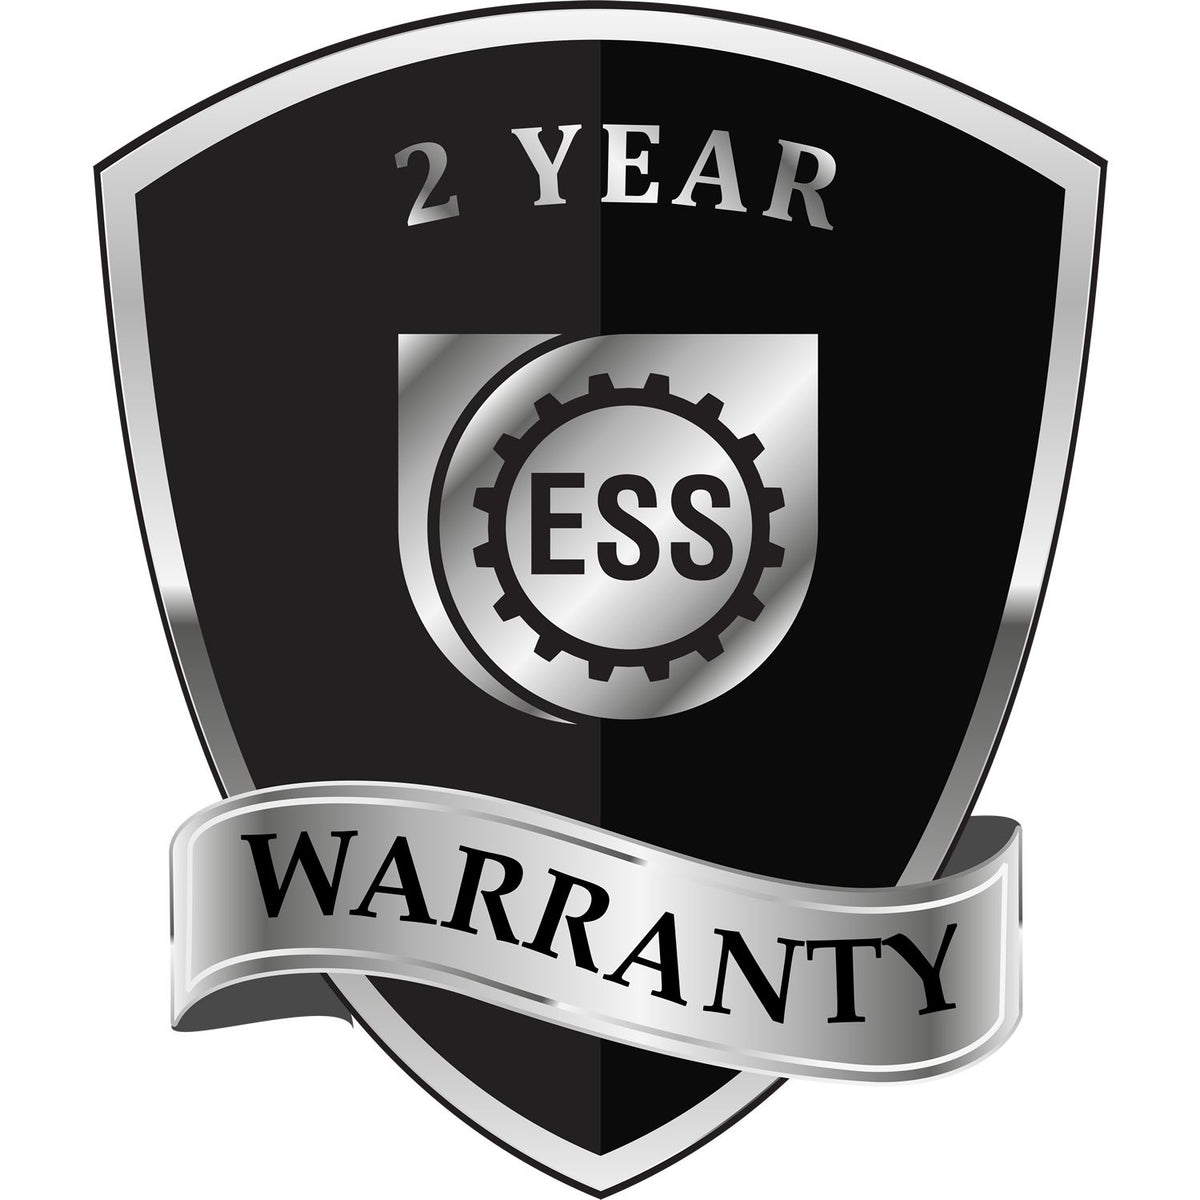 A badge or emblem showing a warranty icon for the Long Reach Montana Land Surveyor Seal